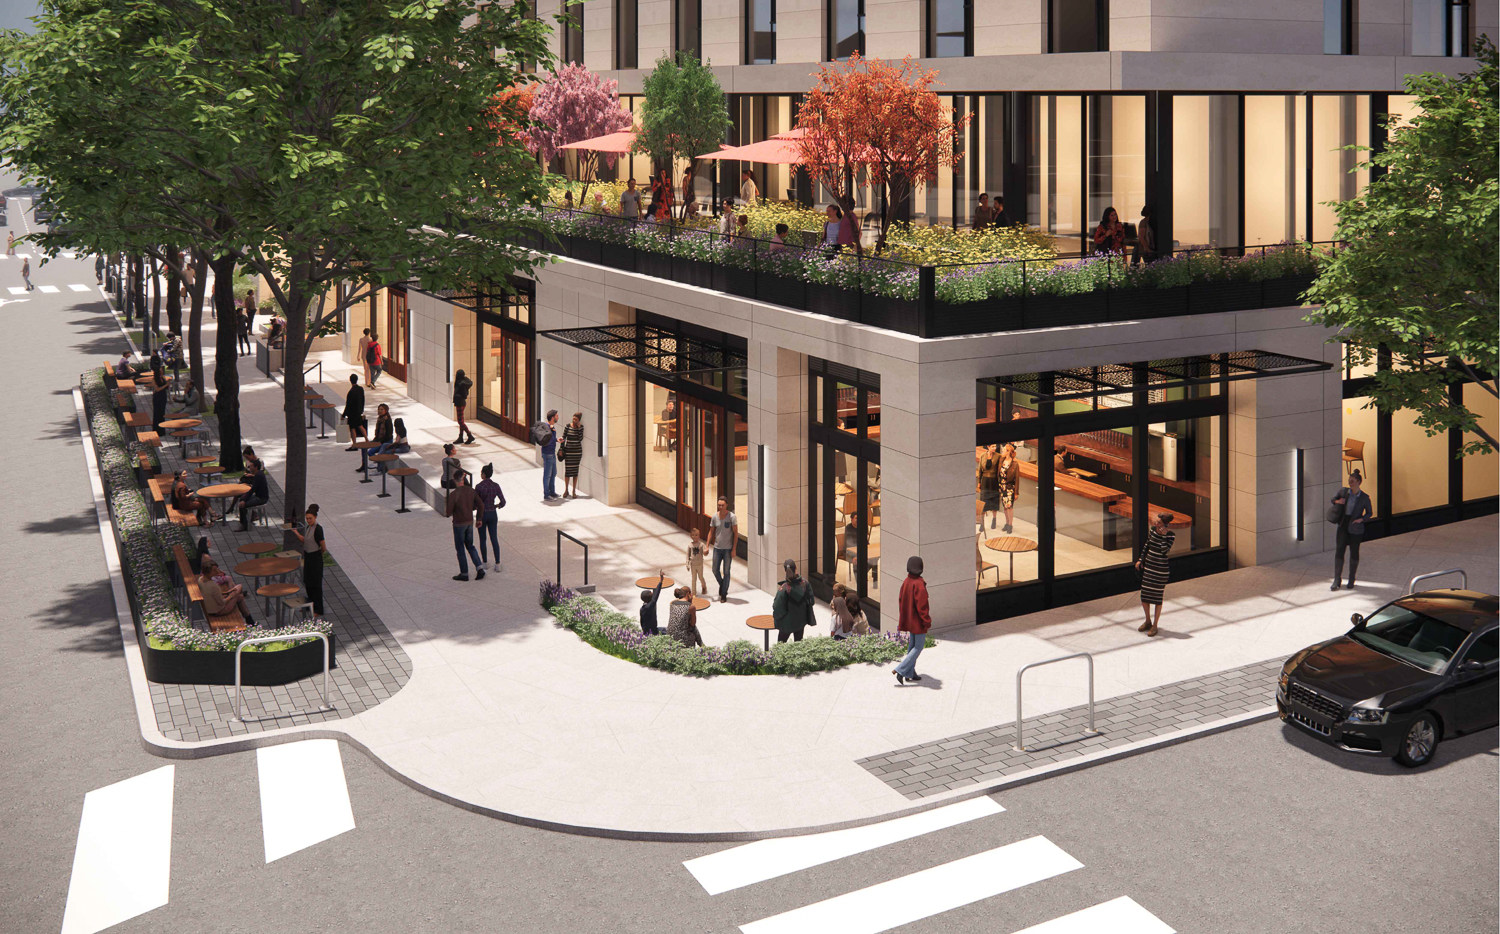 1998 Shattuck Avenue aerial view of the second-floor amenity deck, rendering by Trachtenberg Architects